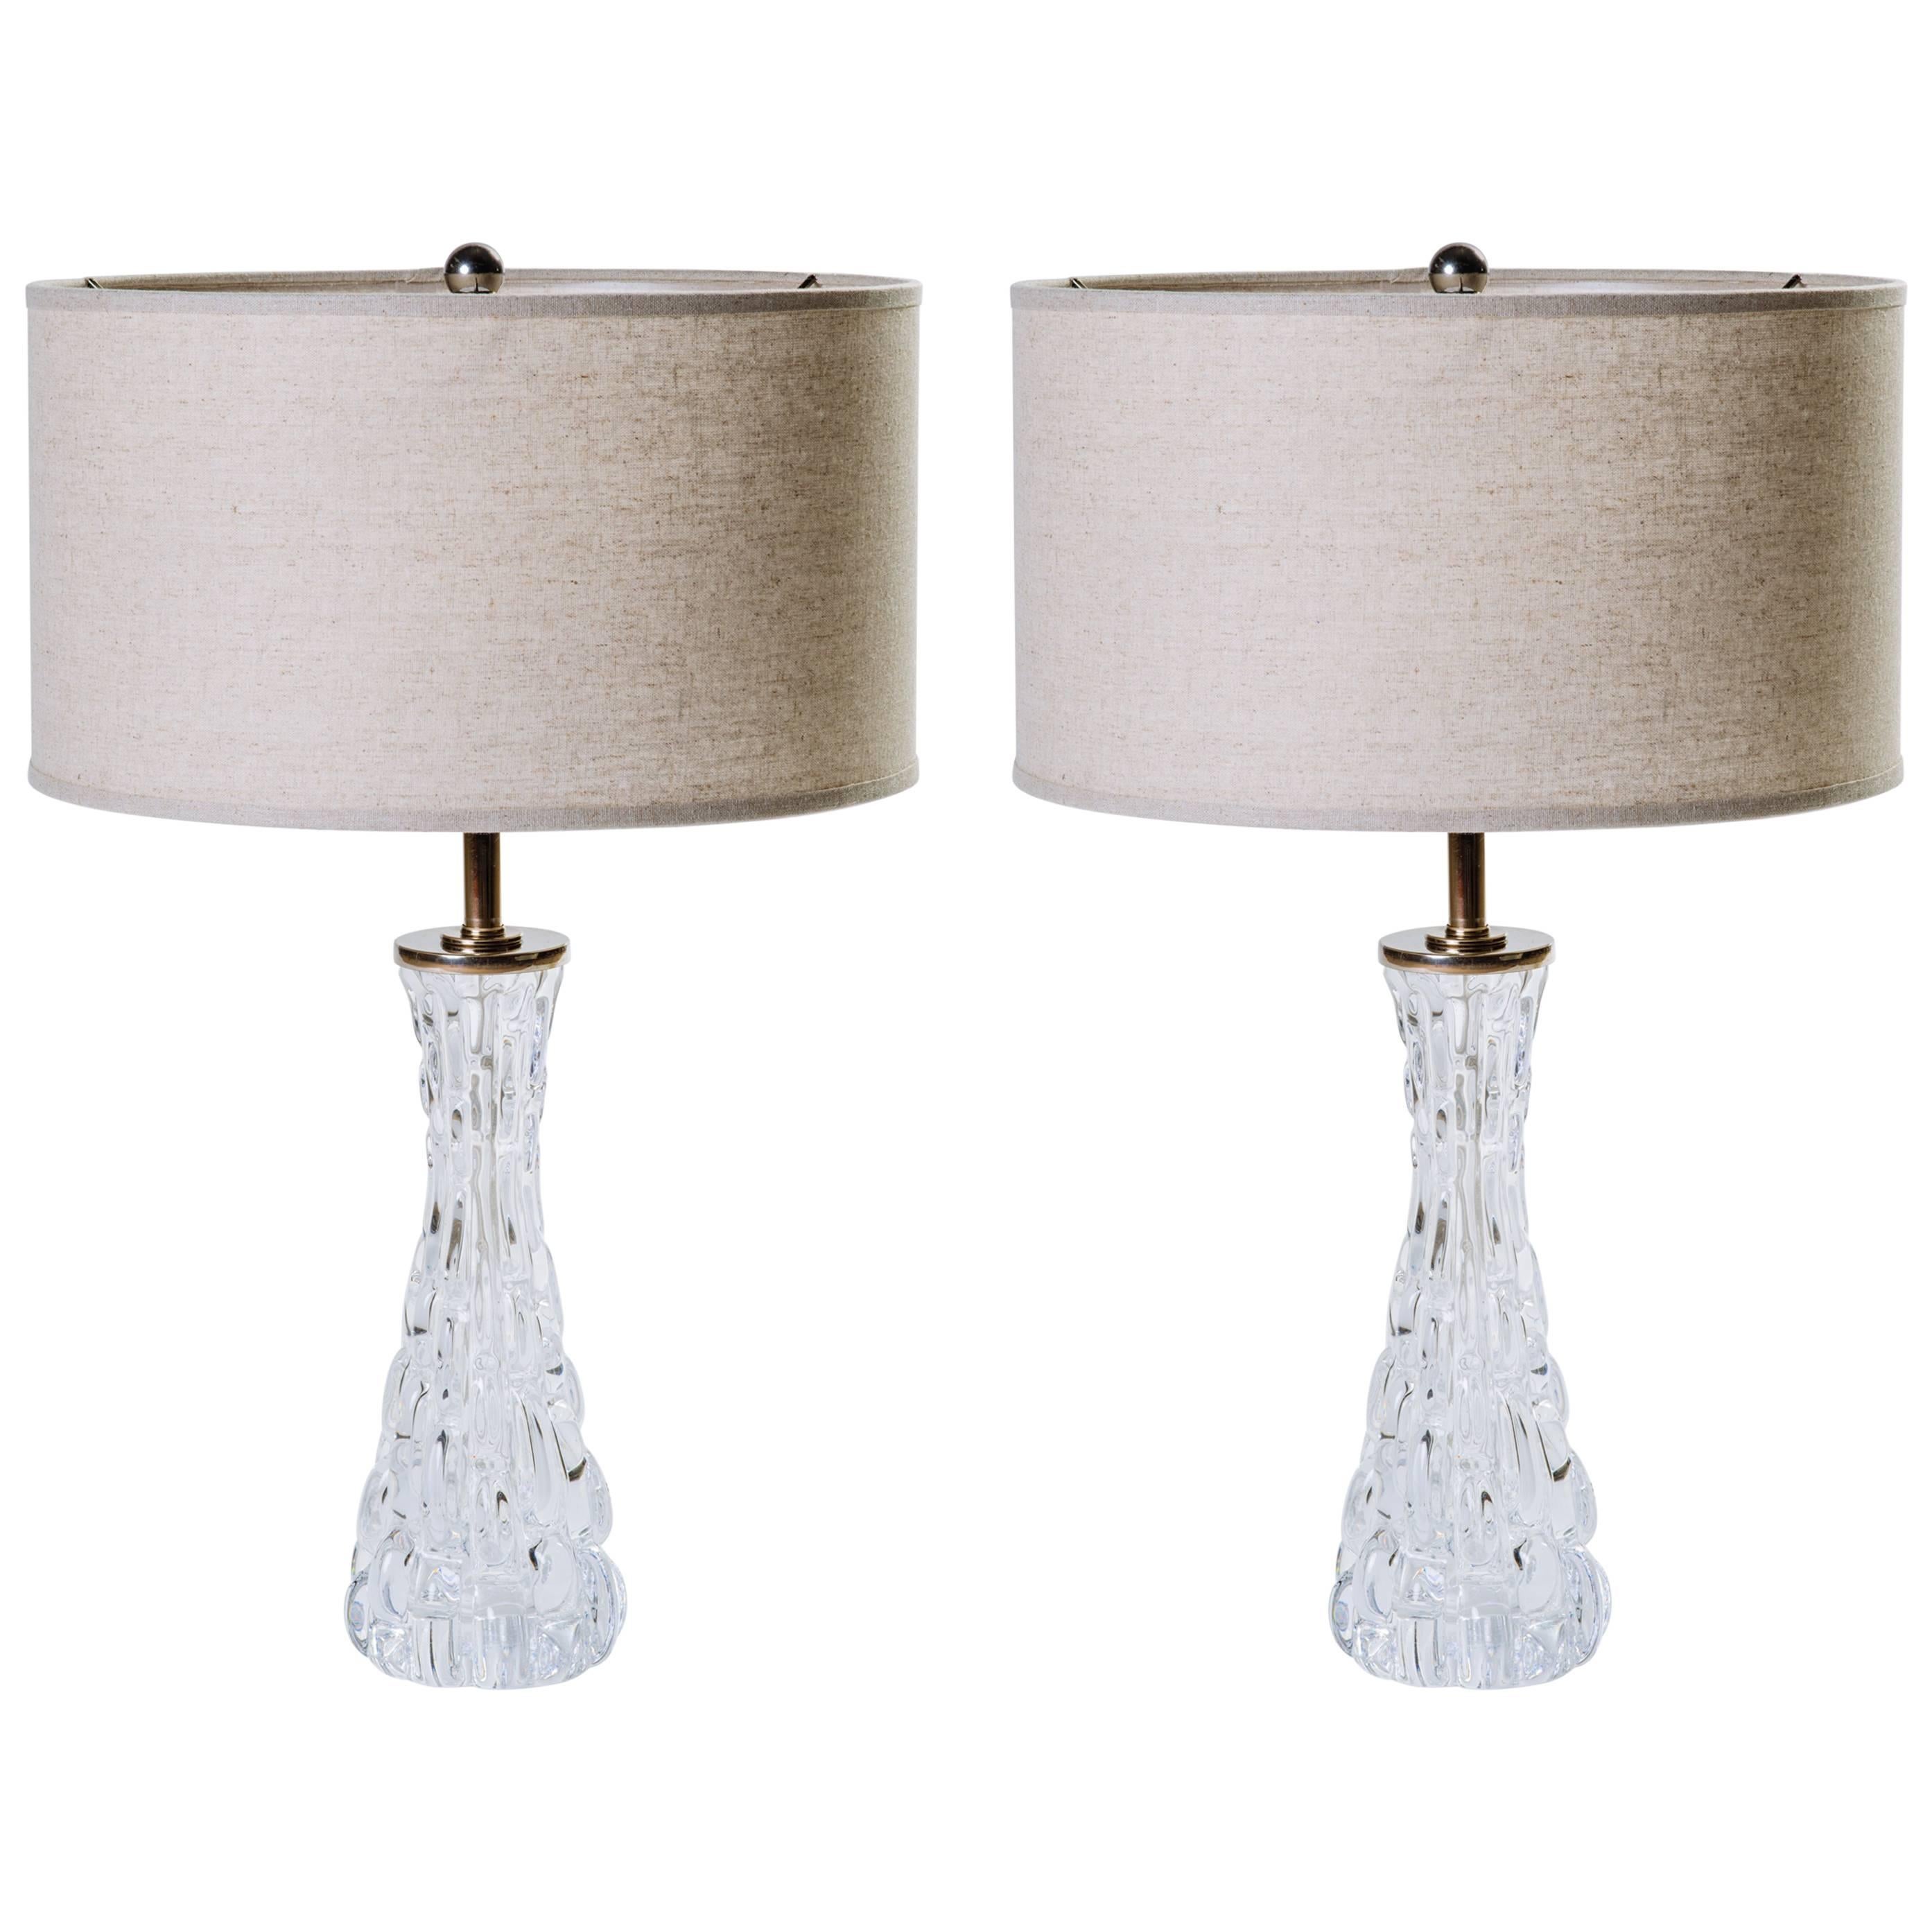 Hand-Crafted Pair of Mid-Century Modern Crystal Ice Lamps by Carl Fagerlund for Orrefors